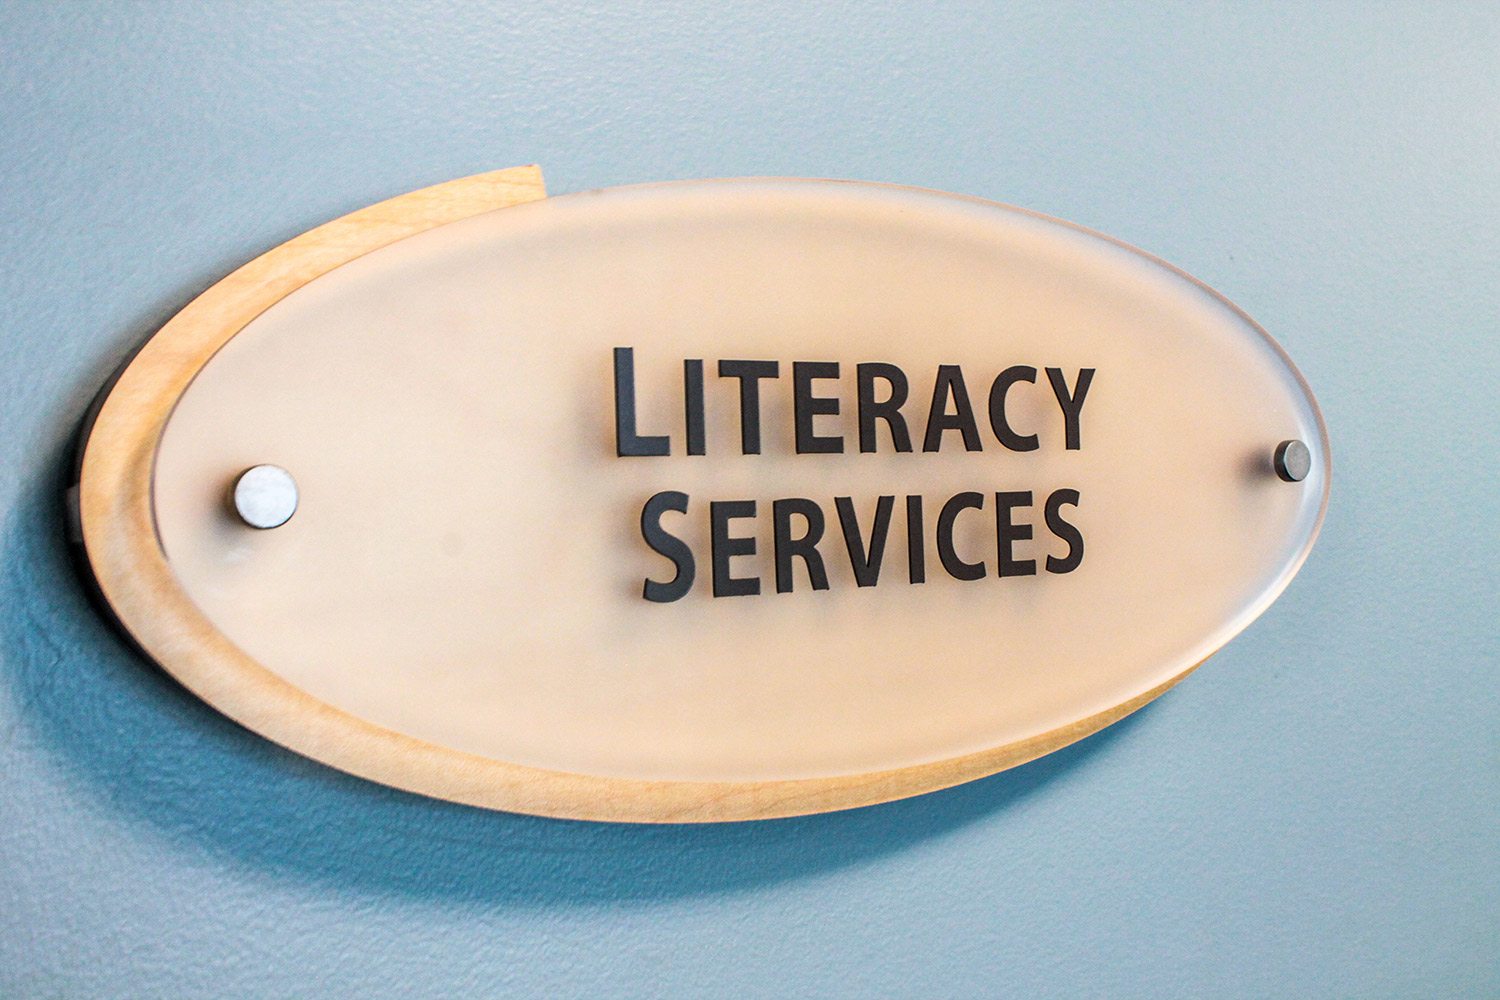 300-national-city-library-literacy-services